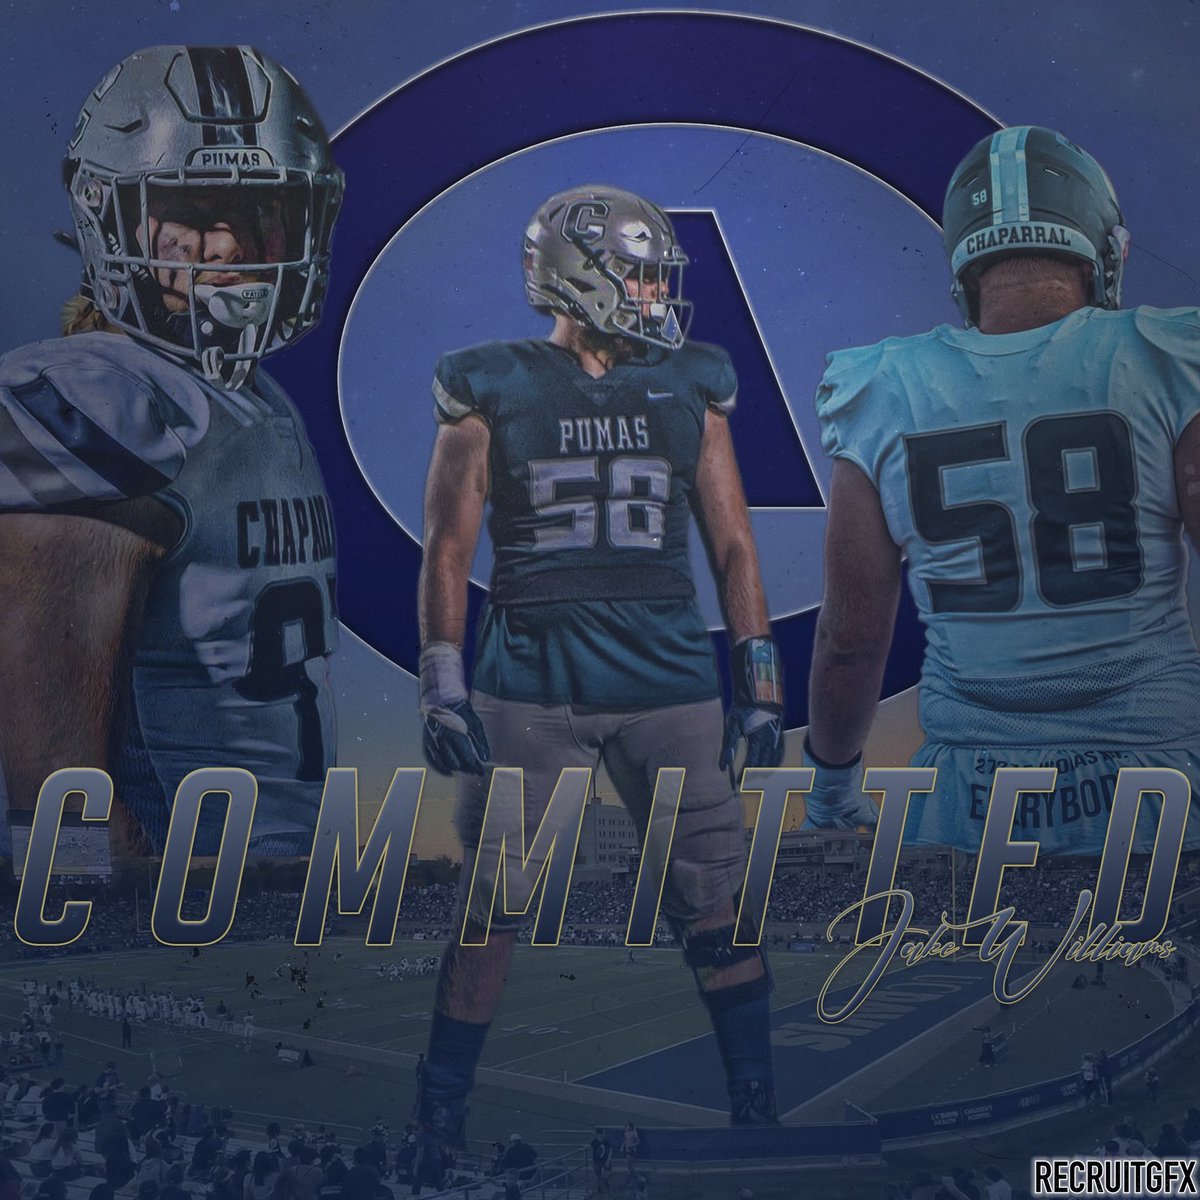 #AGTG I will be signing my NLI tomorrow at 1:20pm at Chaparral High School PAC. Please come and show love.  @UCDfootball @chaparralpumafb @Coach_Ramer @CoachJerryBrady @Coach_CoombsUCD